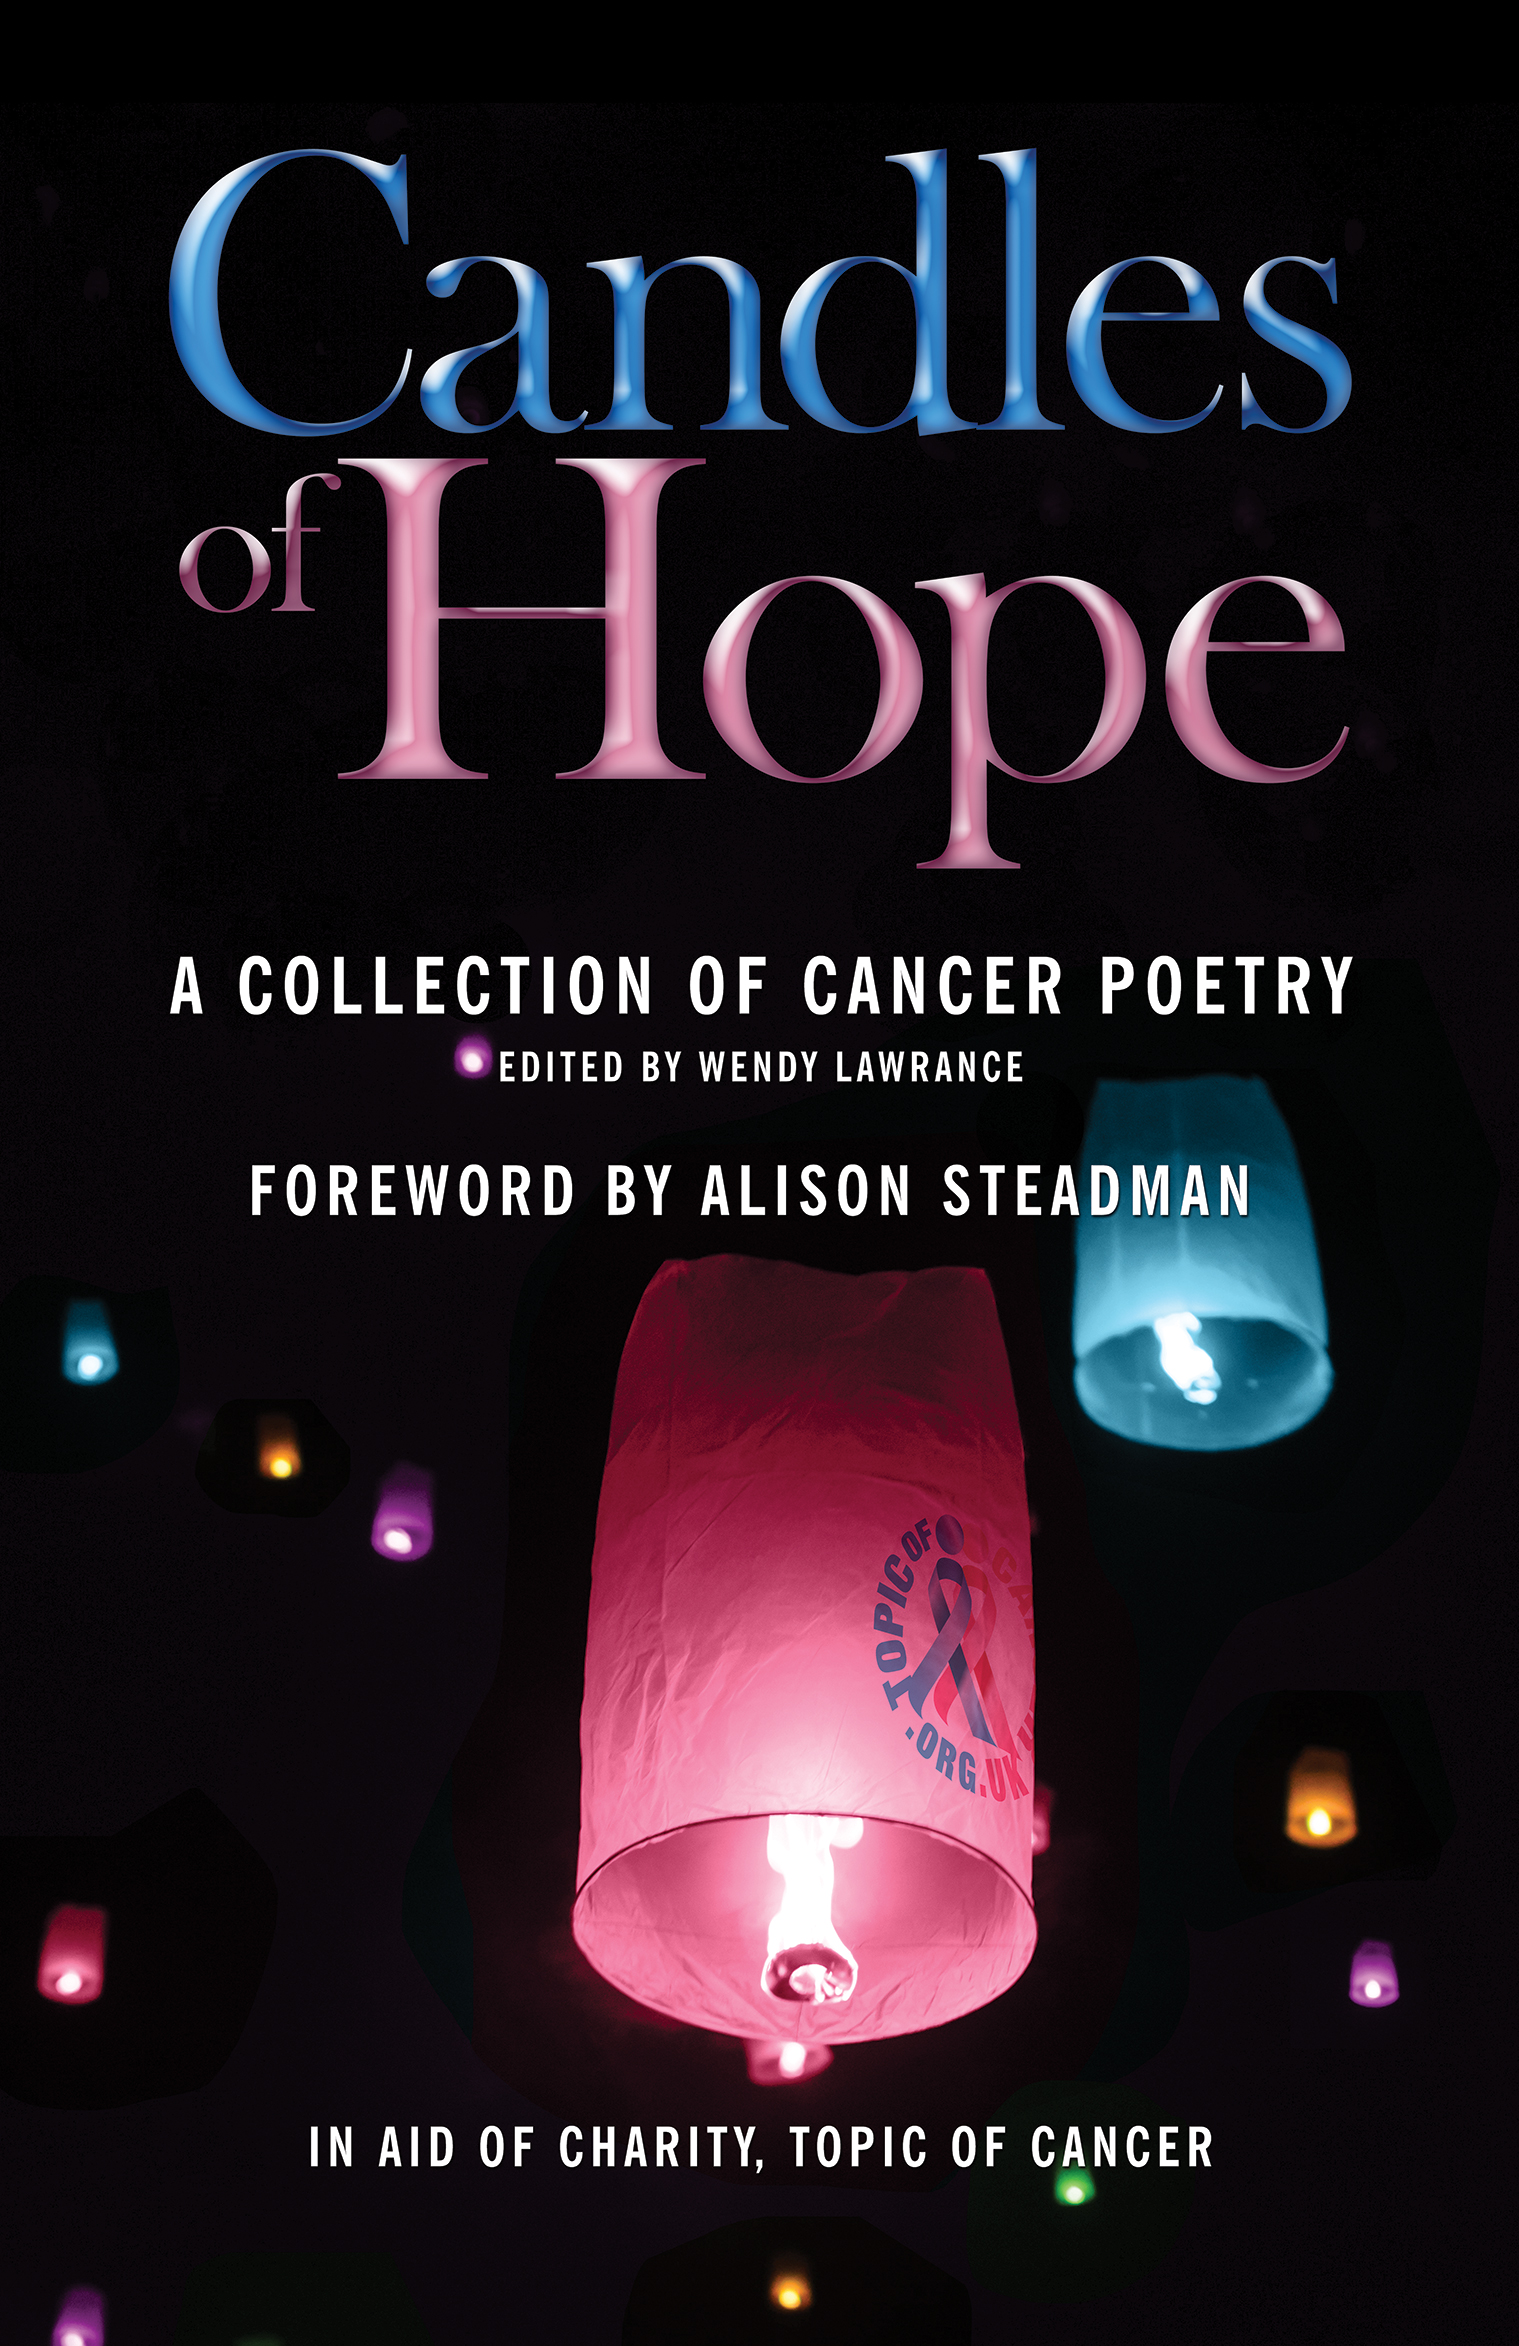 Candles of Hope, edited by Wendy Lawrance and foreword by Alison Steadman, front cover image.